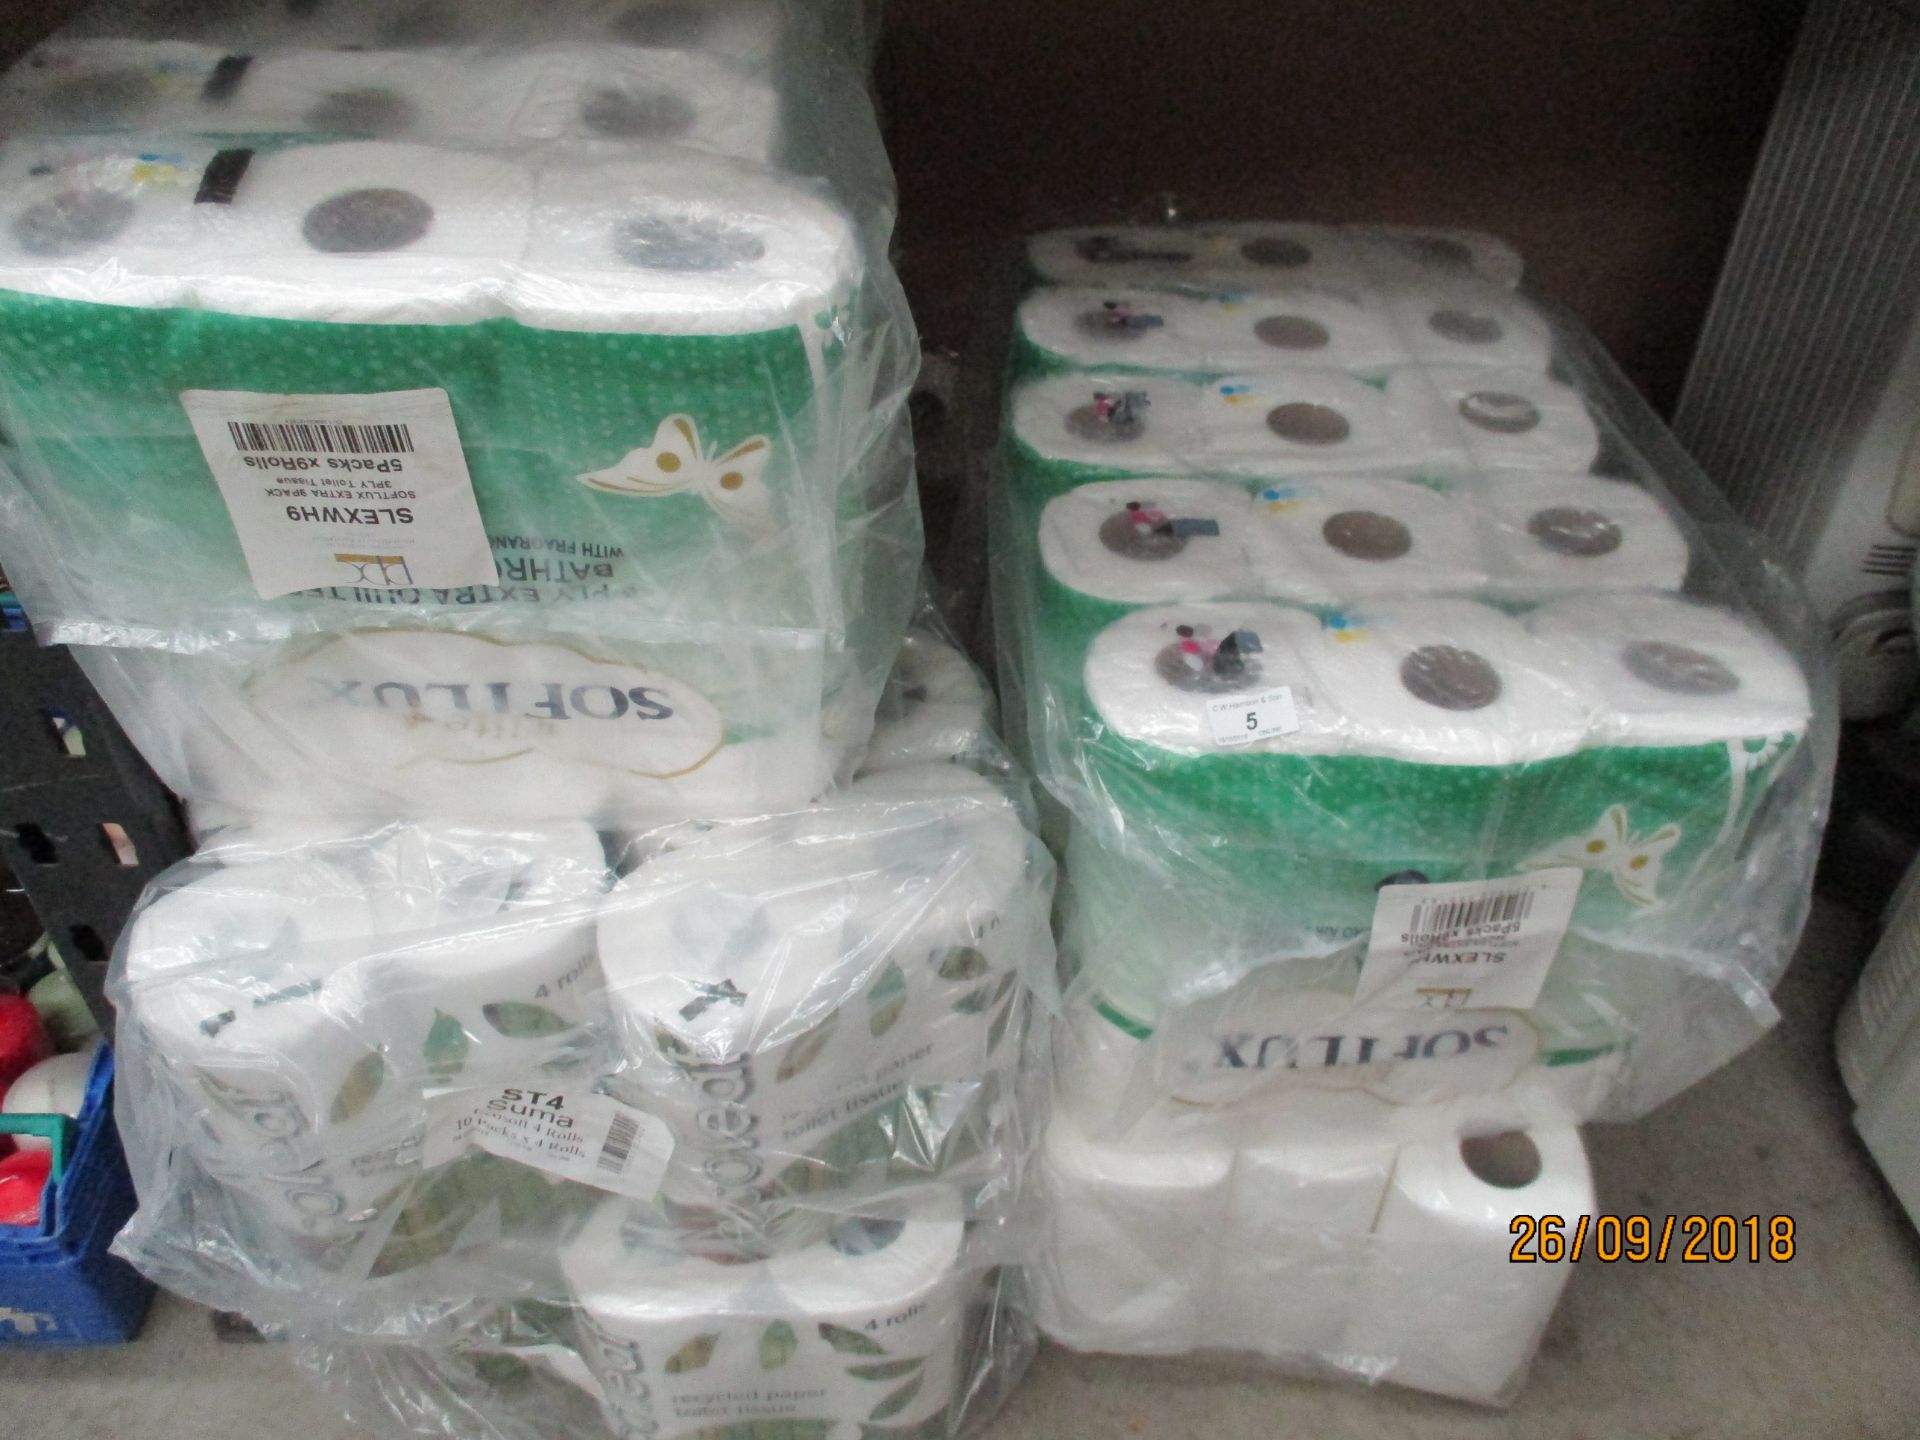 39 x packs of assorted toilet tissues